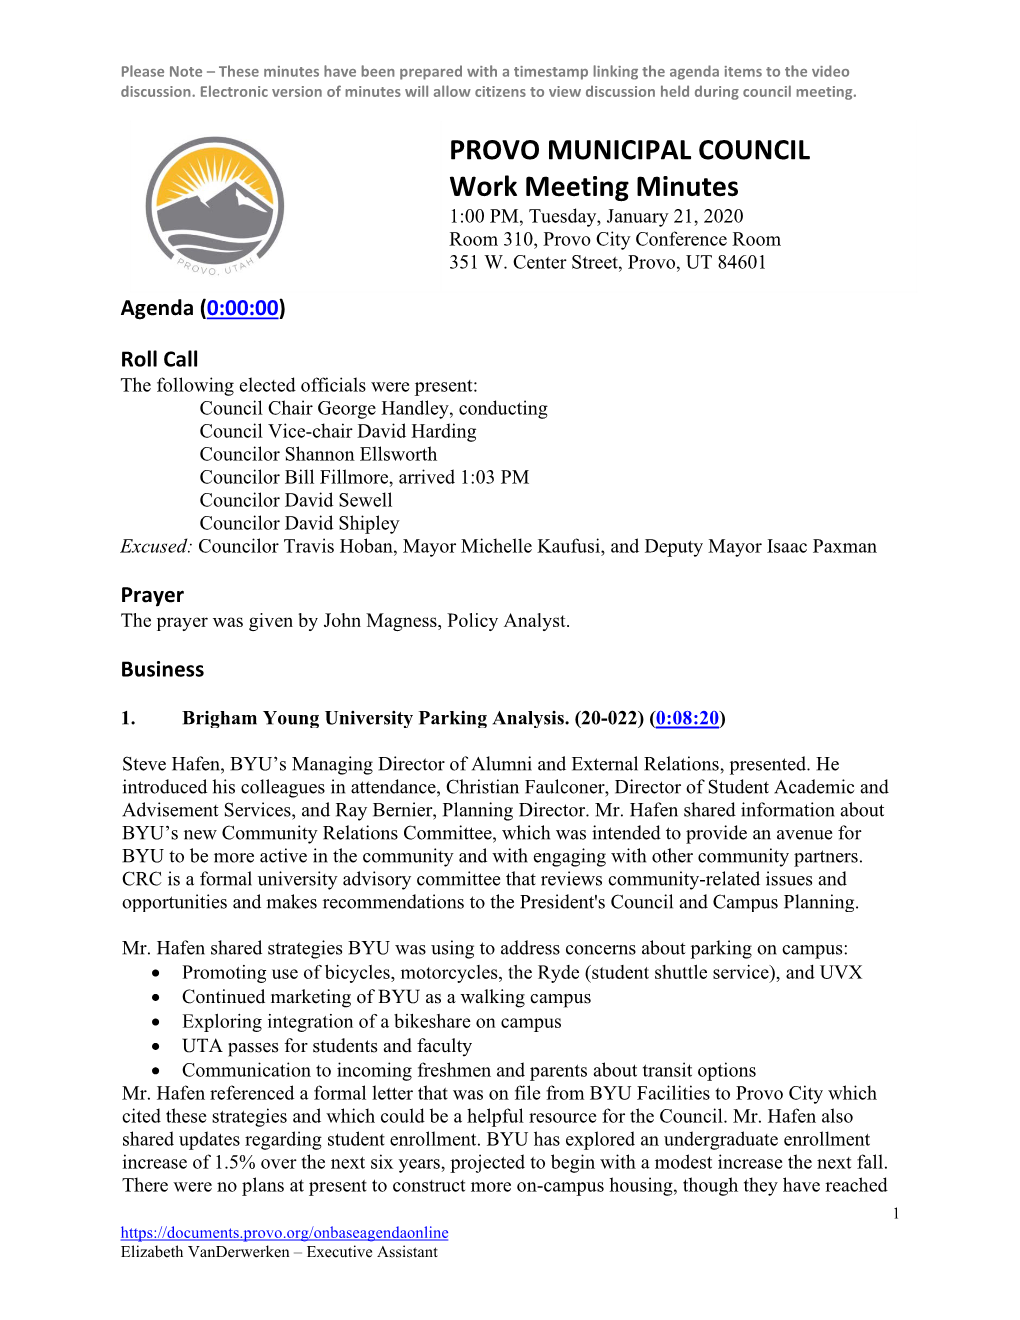 Work Meeting Minutes 1:00 PM, Tuesday, January 21, 2020 Room 310, Provo City Conference Room 351 W